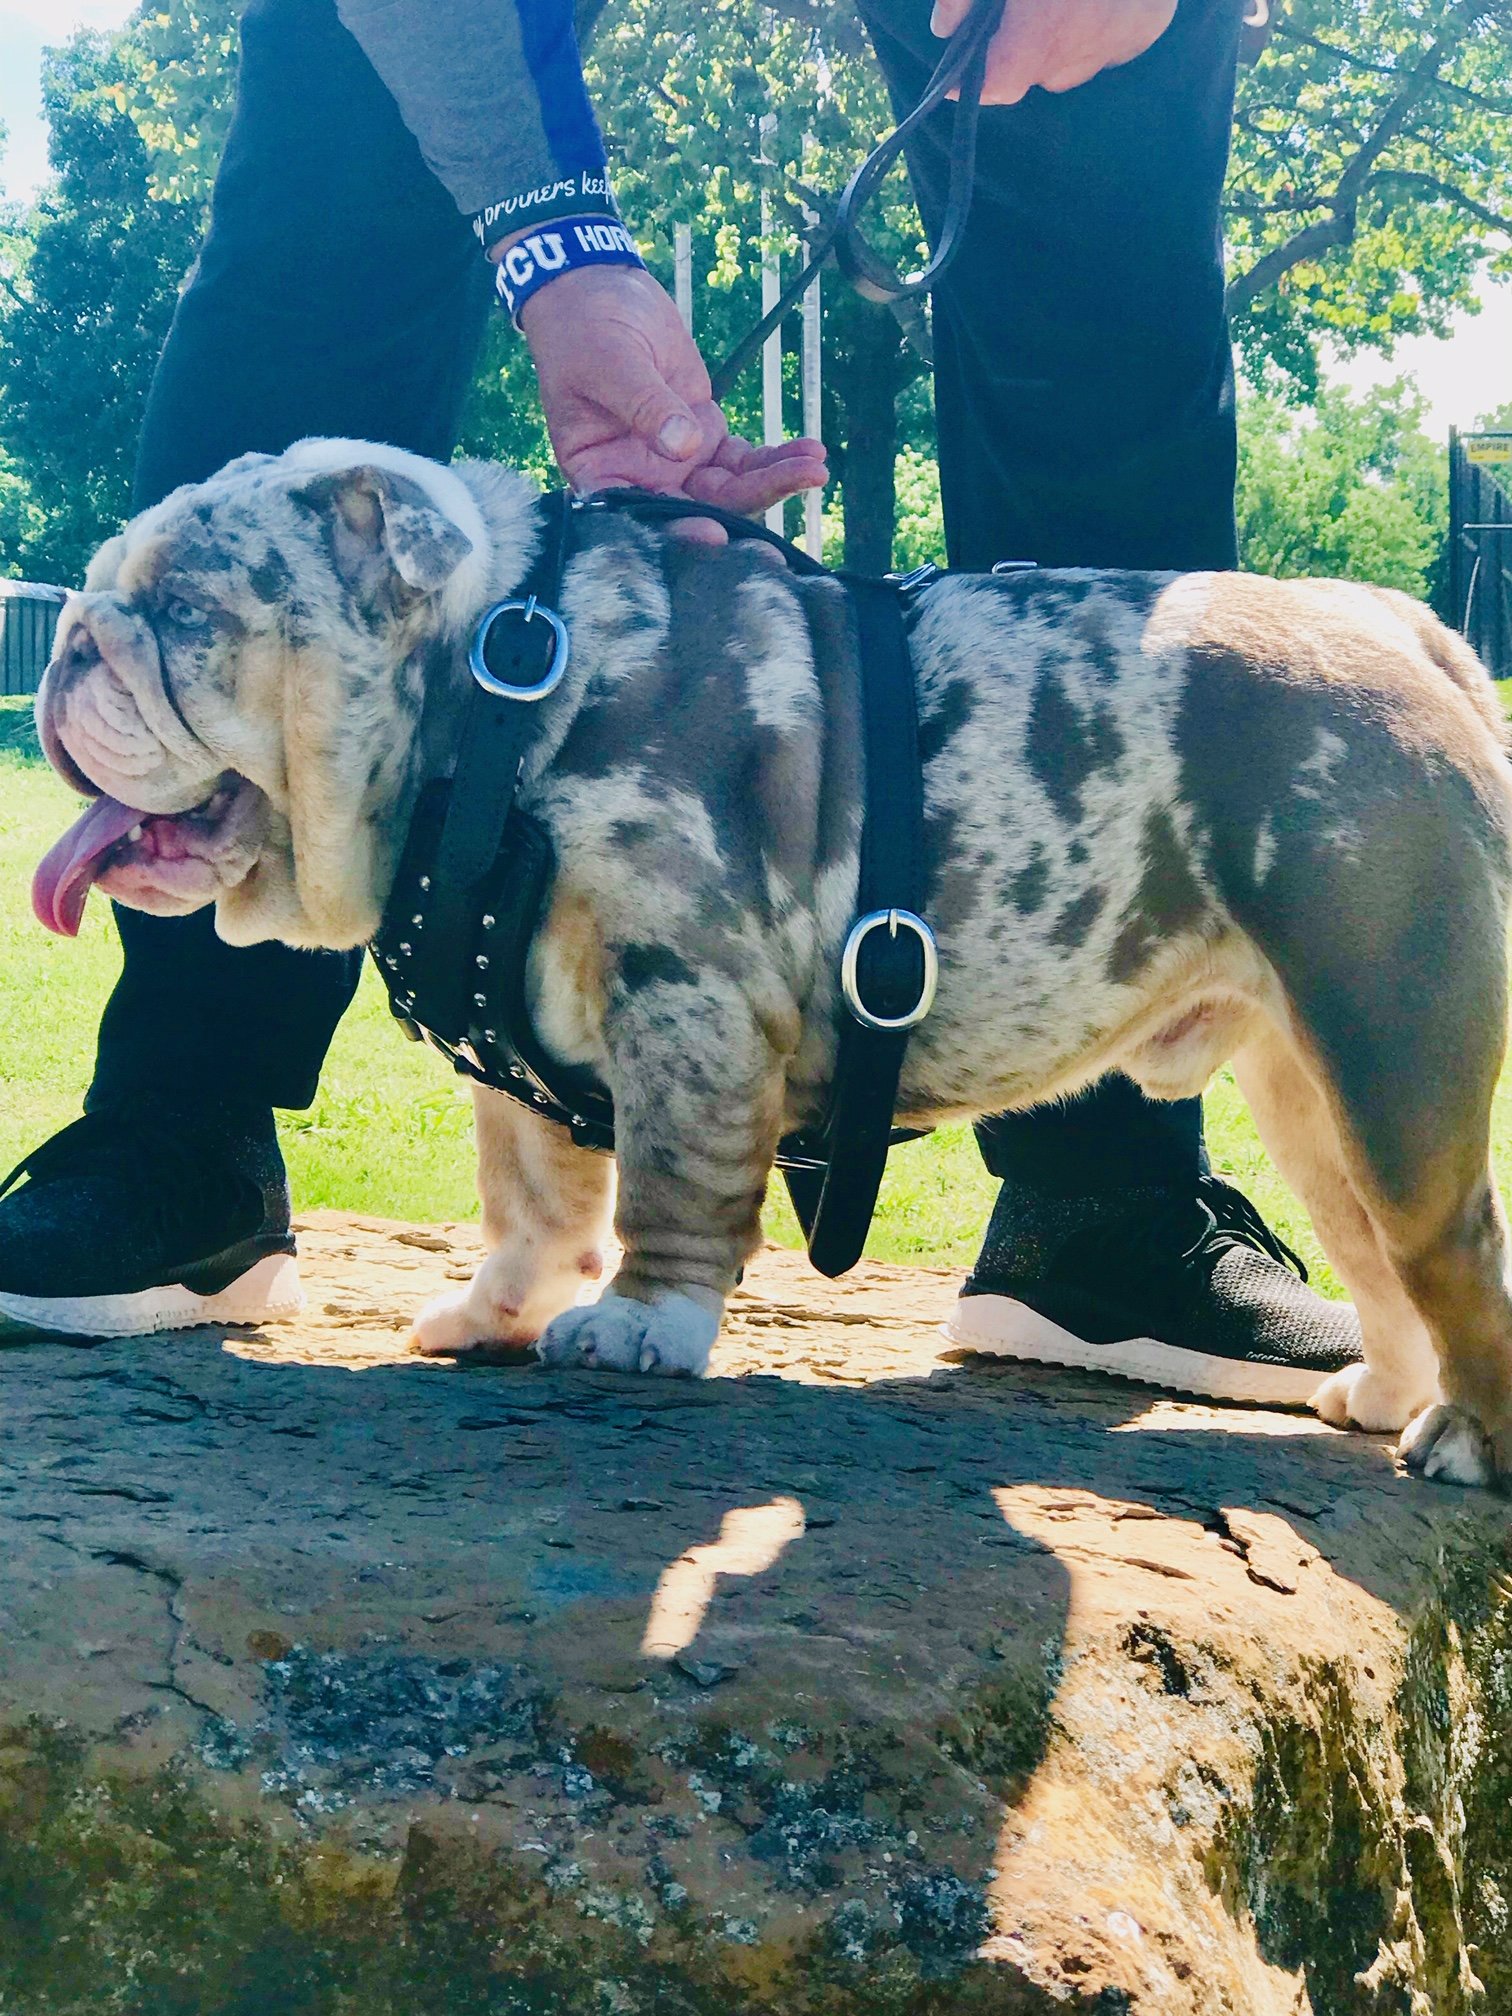 Home - Planet Merle English Bulldogs - Home of the Fully ...